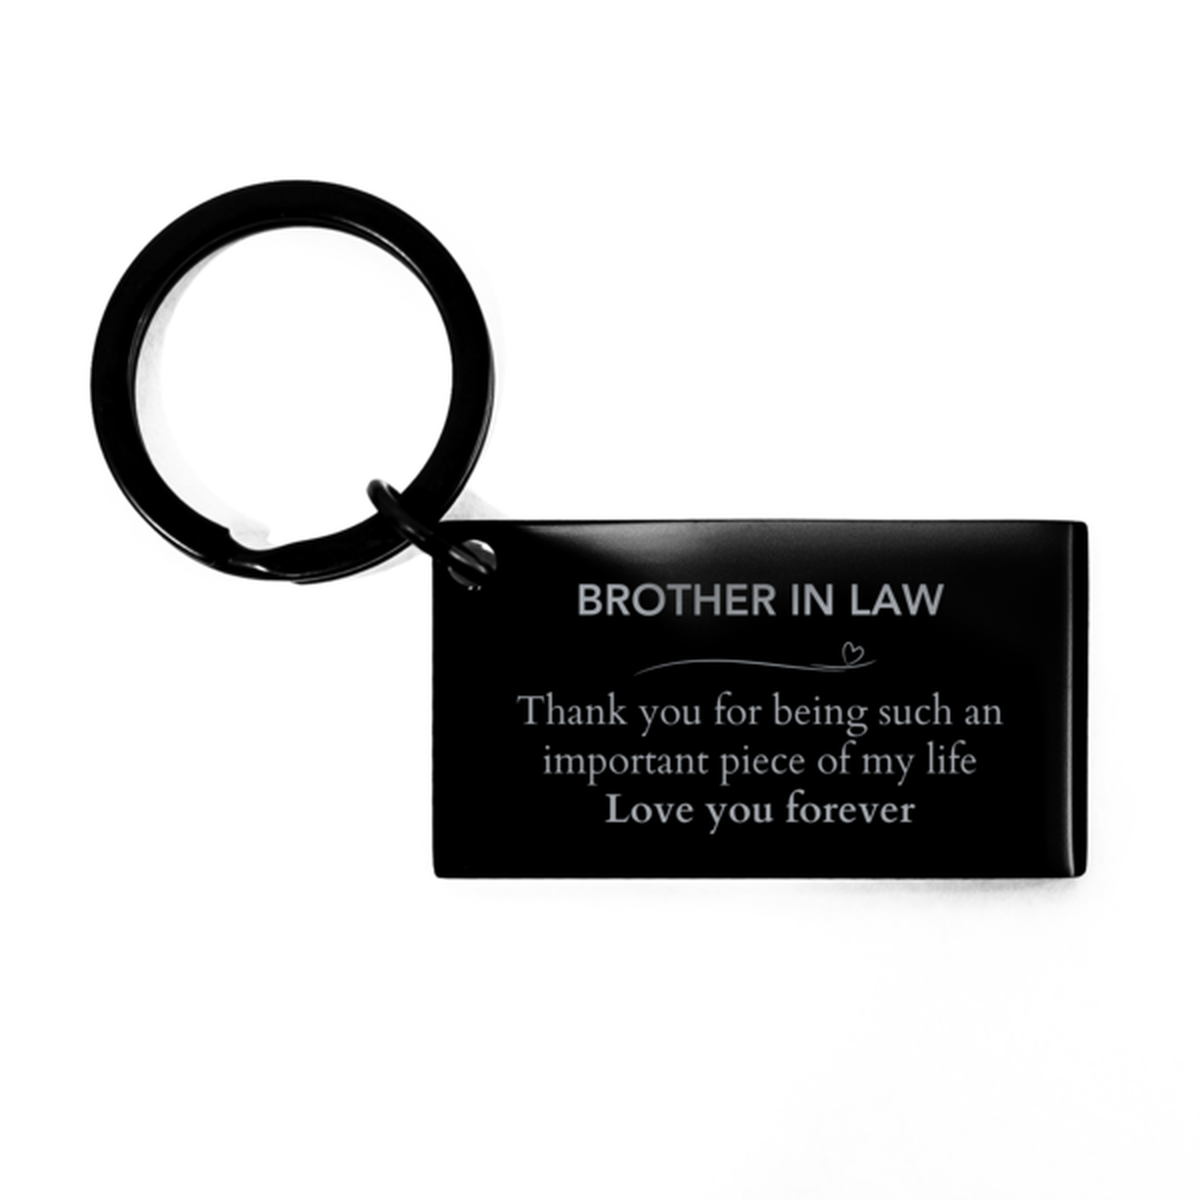 Appropriate Brother In Law Keychain Epic Birthday Gifts for Brother In Law Thank you for being such an important piece of my life Brother In Law Christmas Mothers Fathers Day